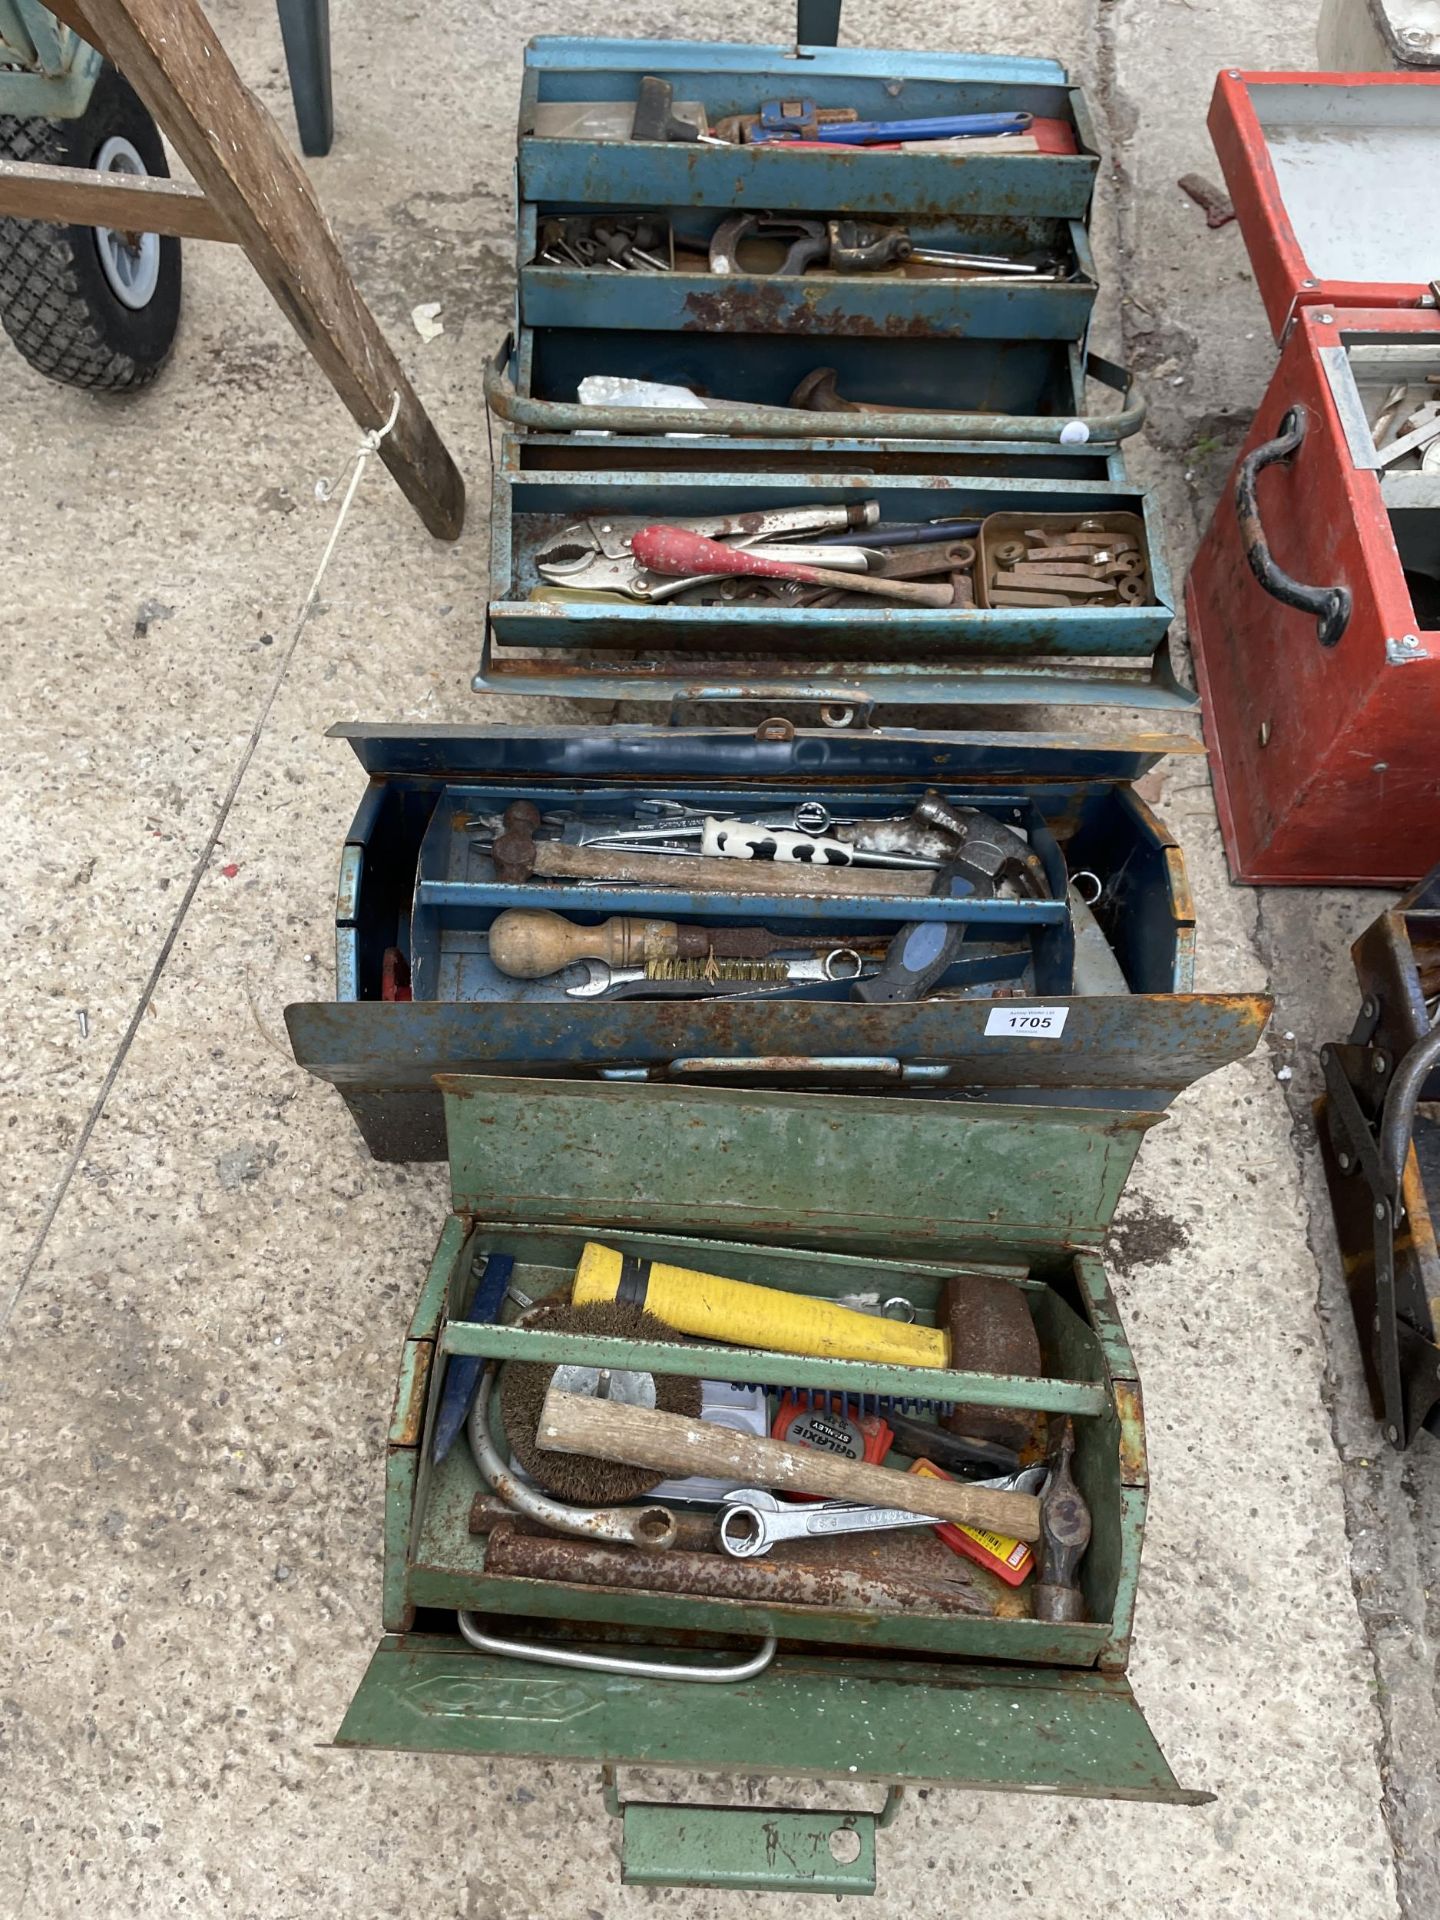 THREE METAL TOOL BOXES WITH AN ASSORTMENT OF TOOLS TO INCLUDE HAMMERS, MOLE GRIPS AND CHISELS ETC